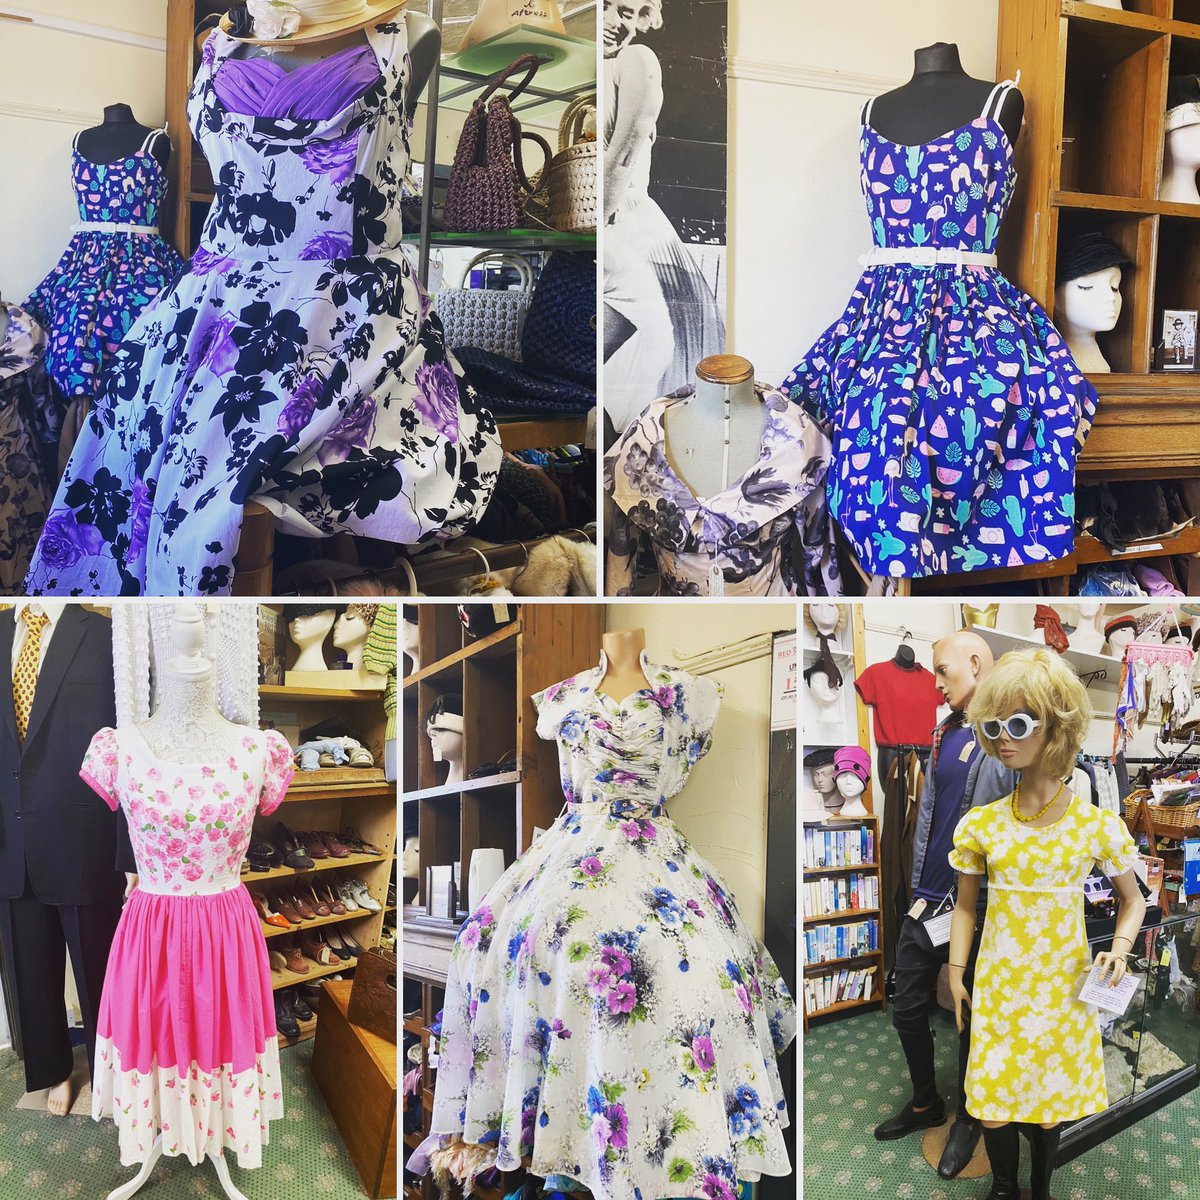 What a weekend to wear a summer frock and unit 32 has plenty to choose from. #vintagedresses #vintageclothes #summerfrocks #summerdresses #vintagesummer #vintagefashion #ladiesvintage #vintagewedding #astraantiquescentre #hemswell #lincolnshire